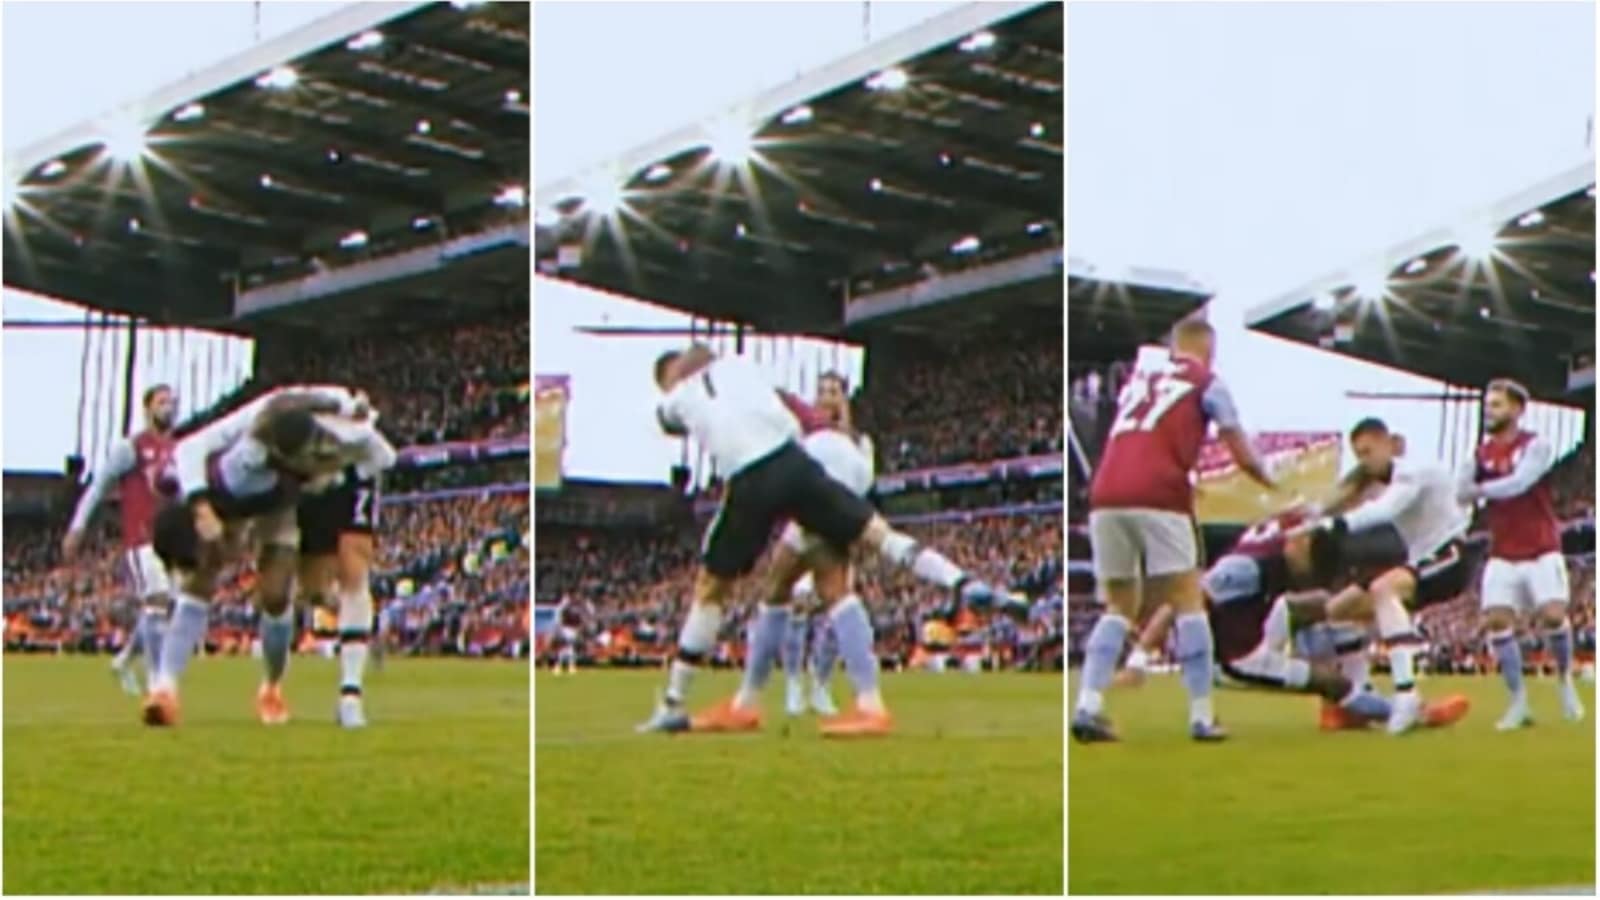 watch-ronaldo-tyrone-mings-get-into-ugly-wwe-esque-fight-in-aston-villa-vs-man-utd-match-players-forced-to-intervene